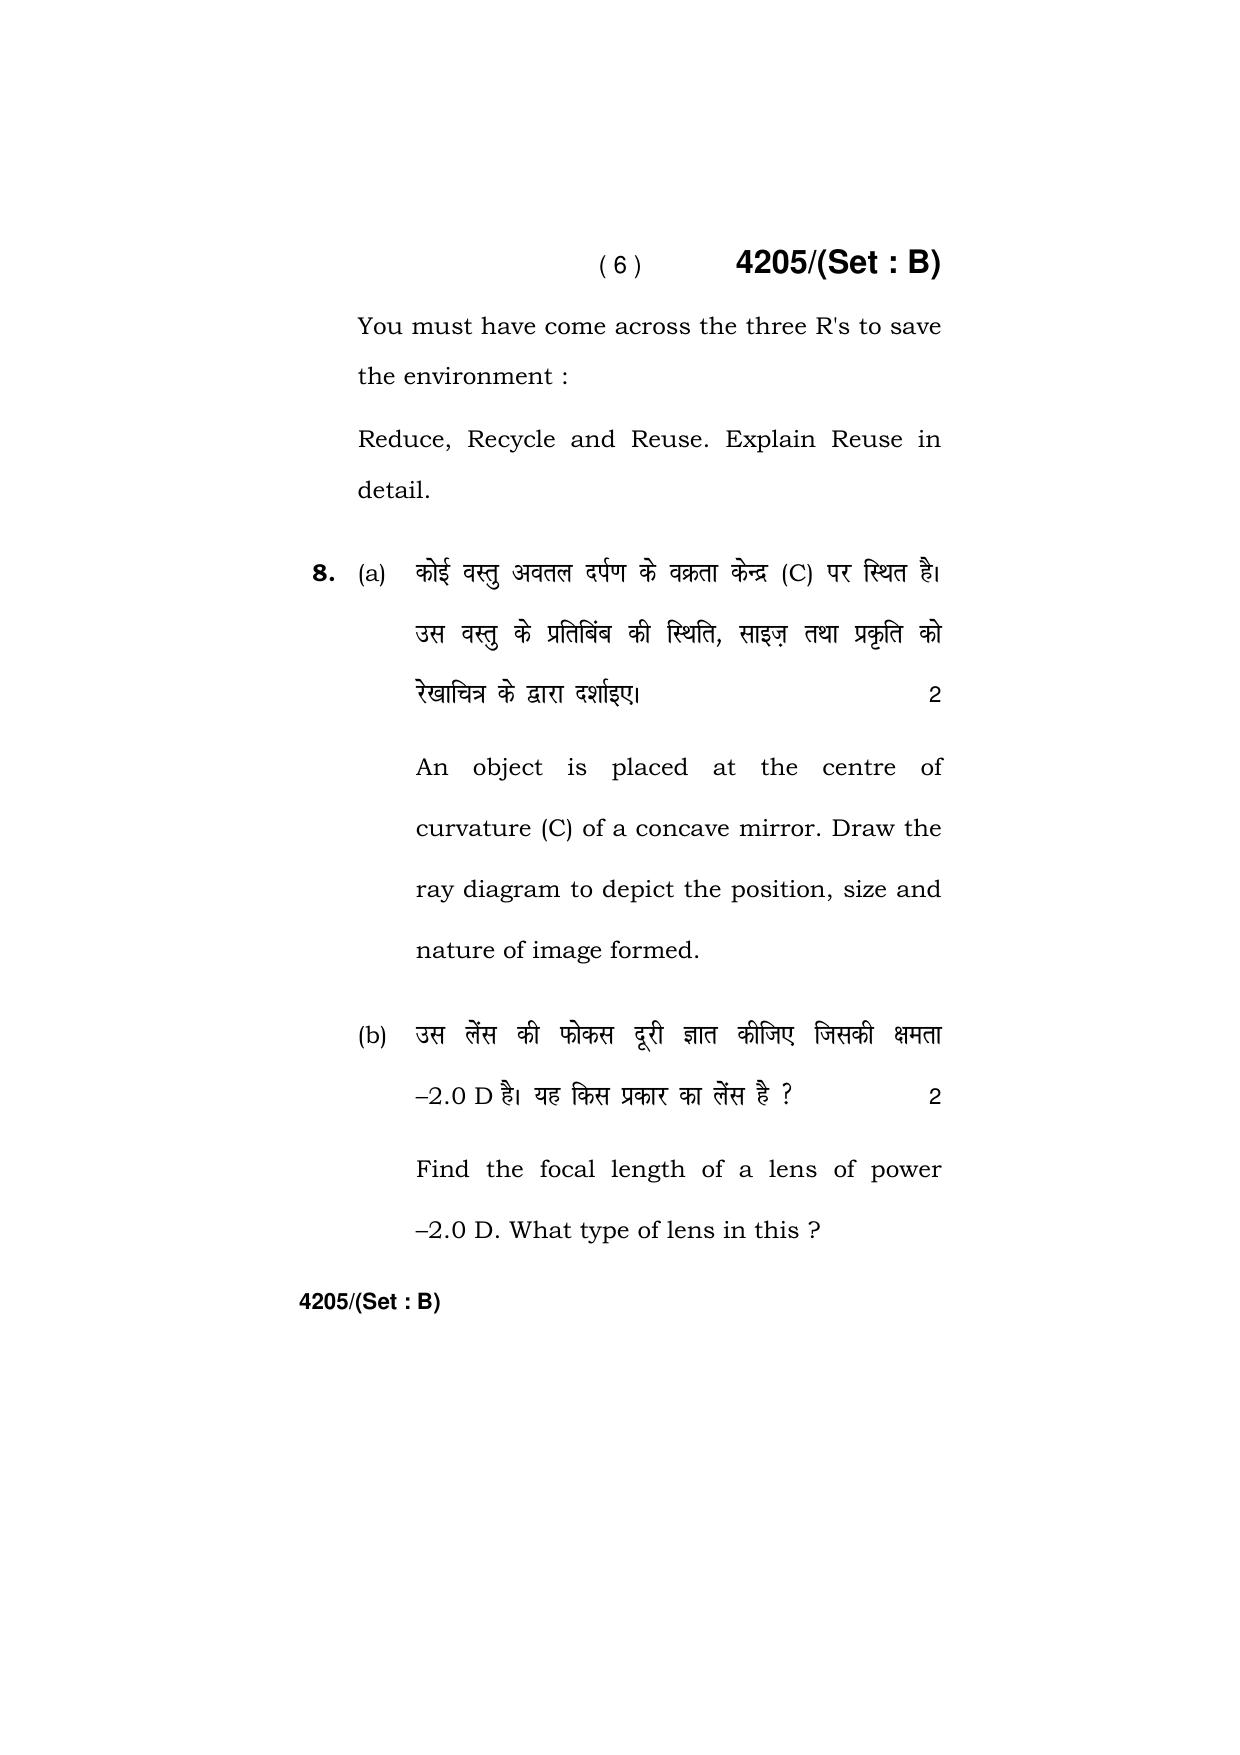 Haryana Board HBSE Class 10 Science (All Set) 2019 Question Paper - Page 22